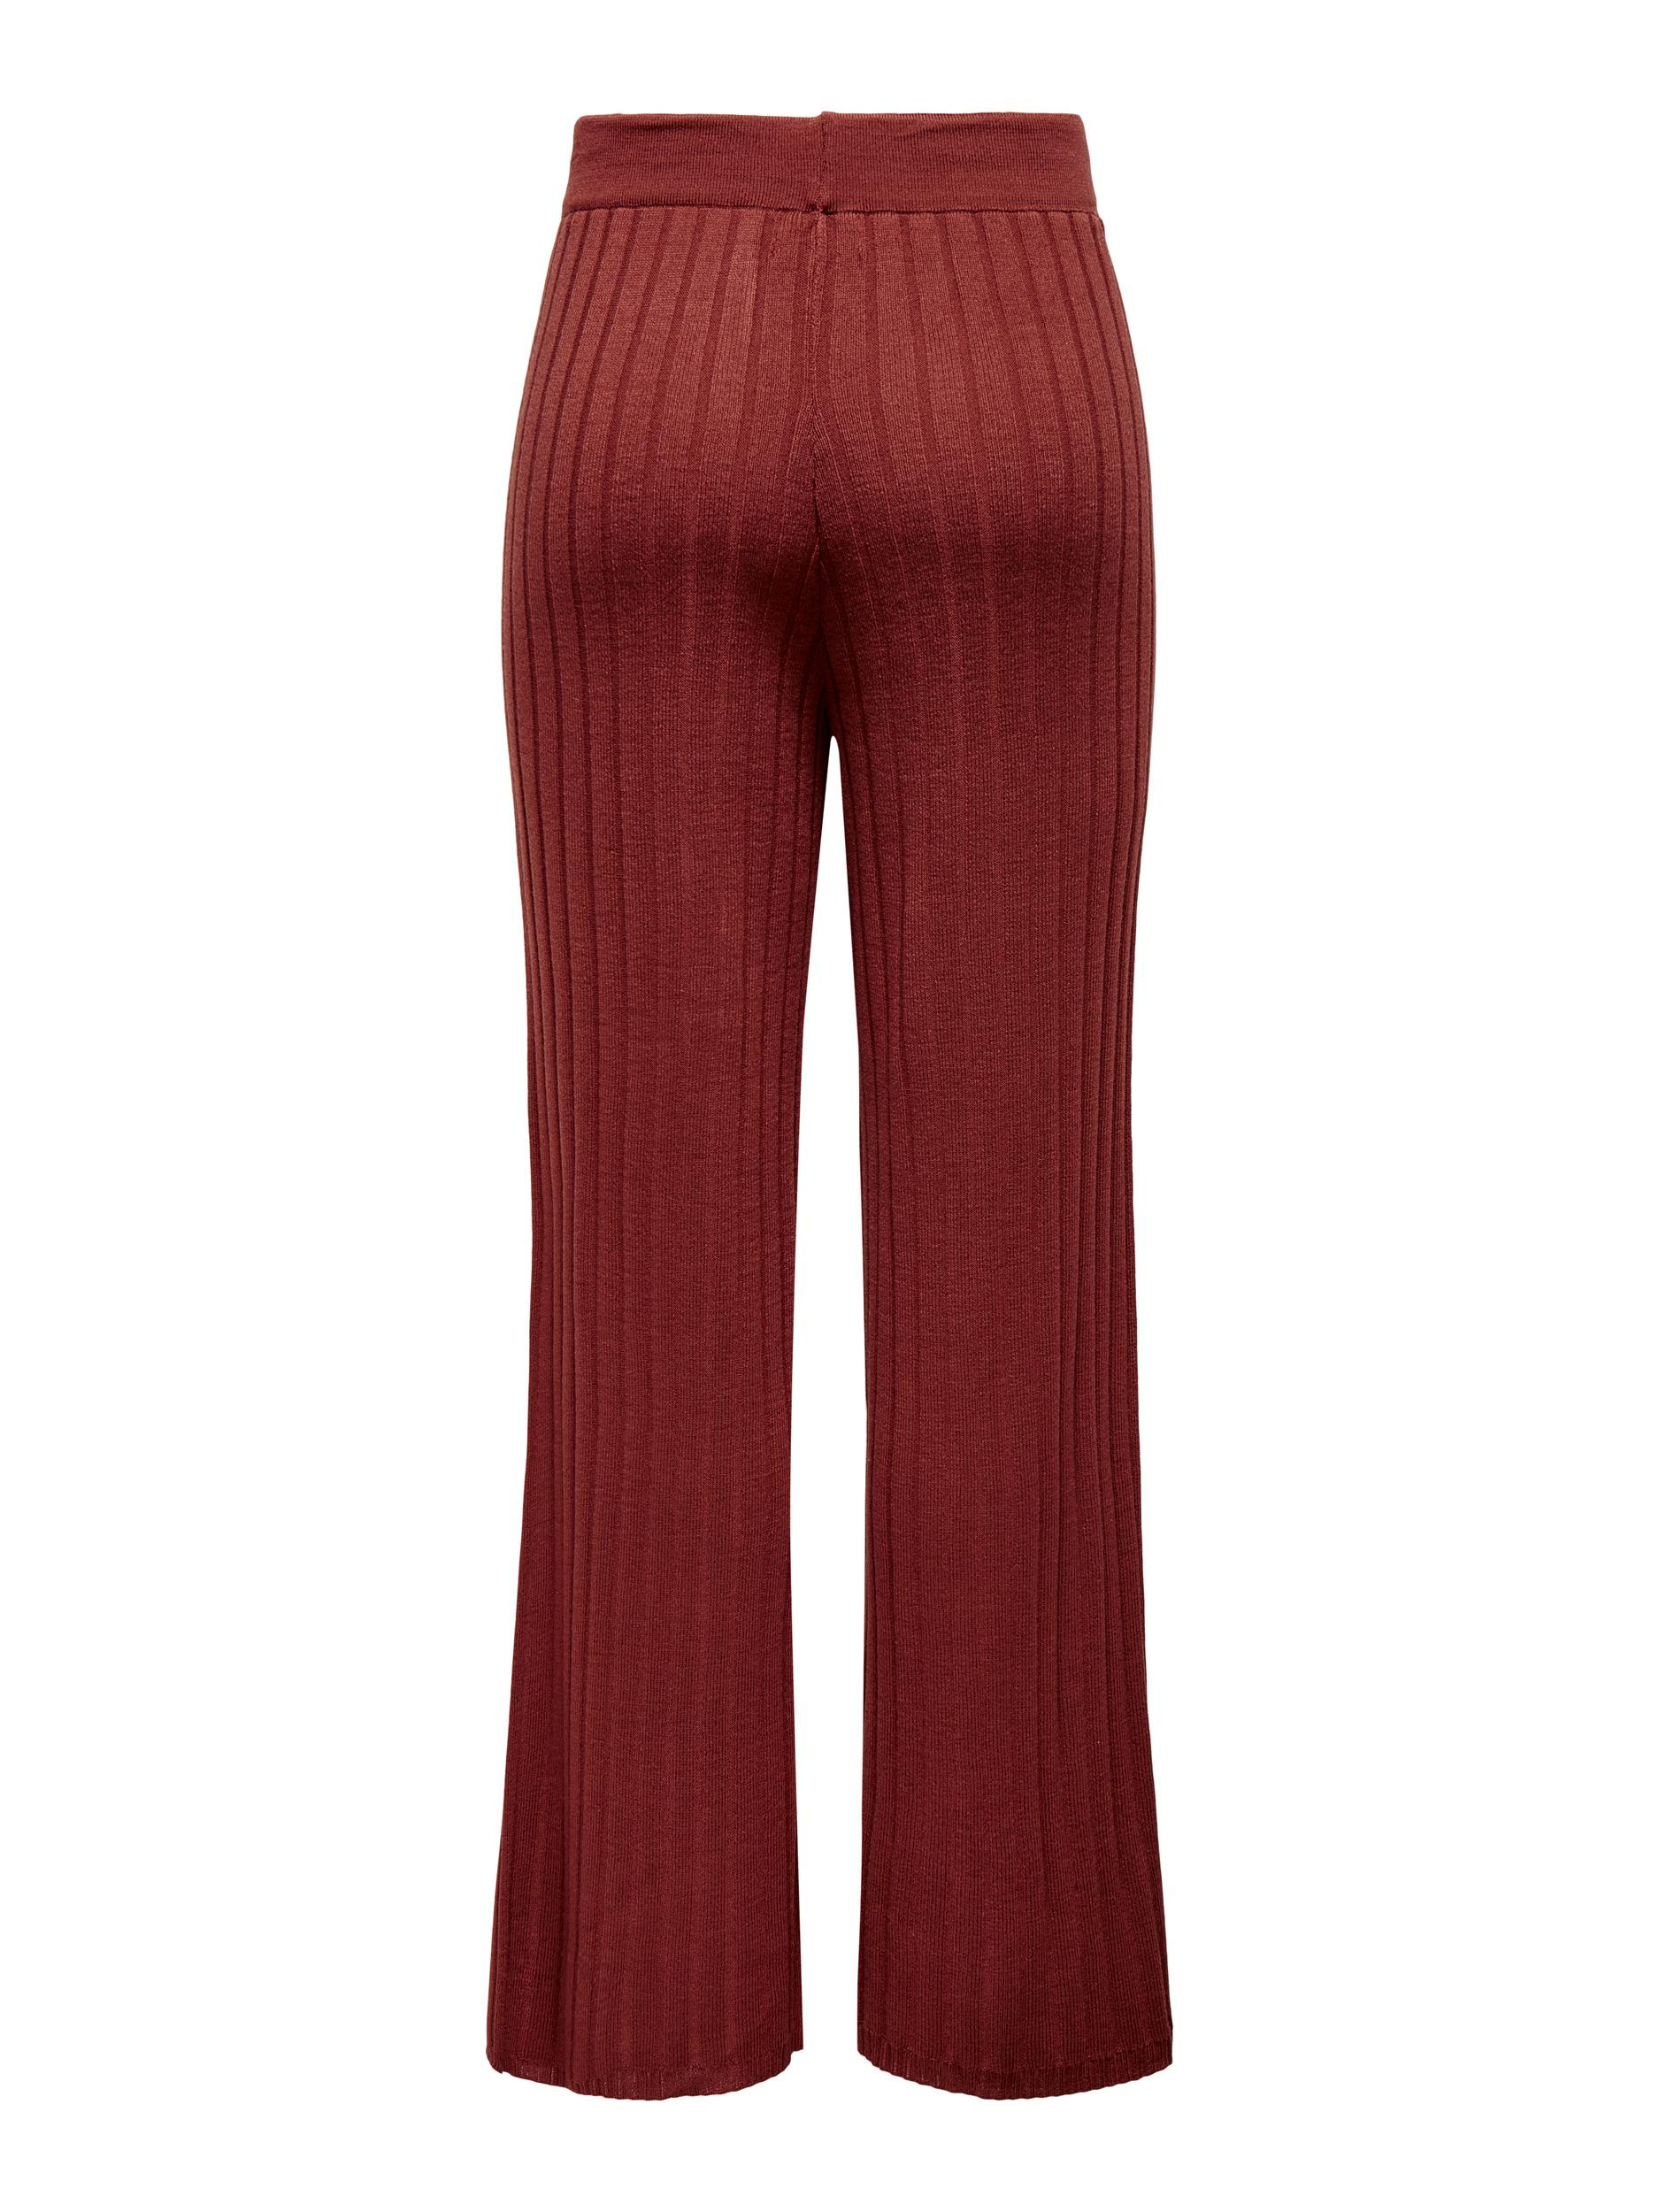 high-waisted trousers, Red, large image number 1